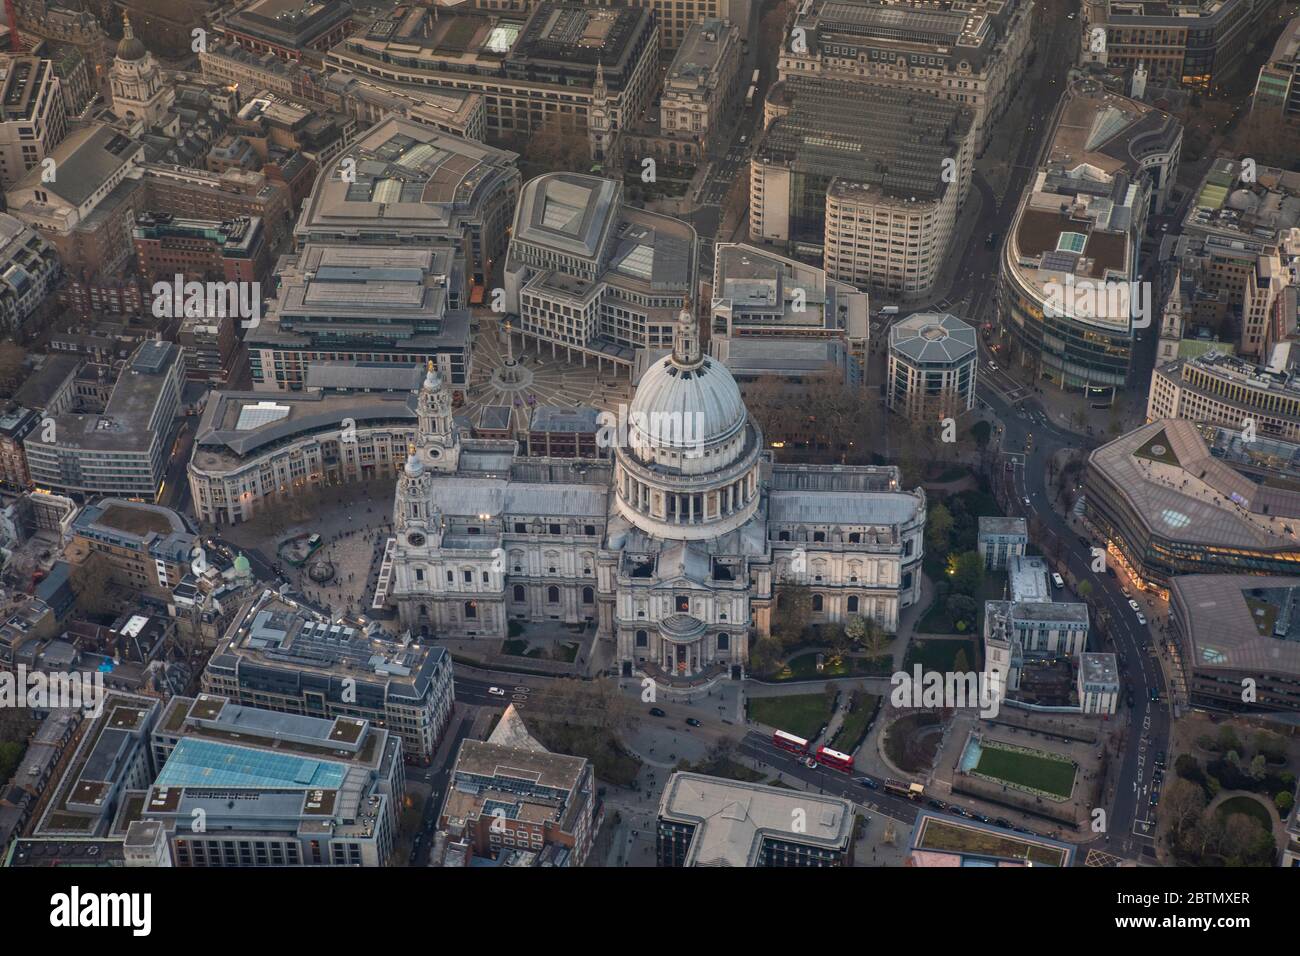 Aerial View of St Paul's Cathedral in London at Dusk Stock Photo